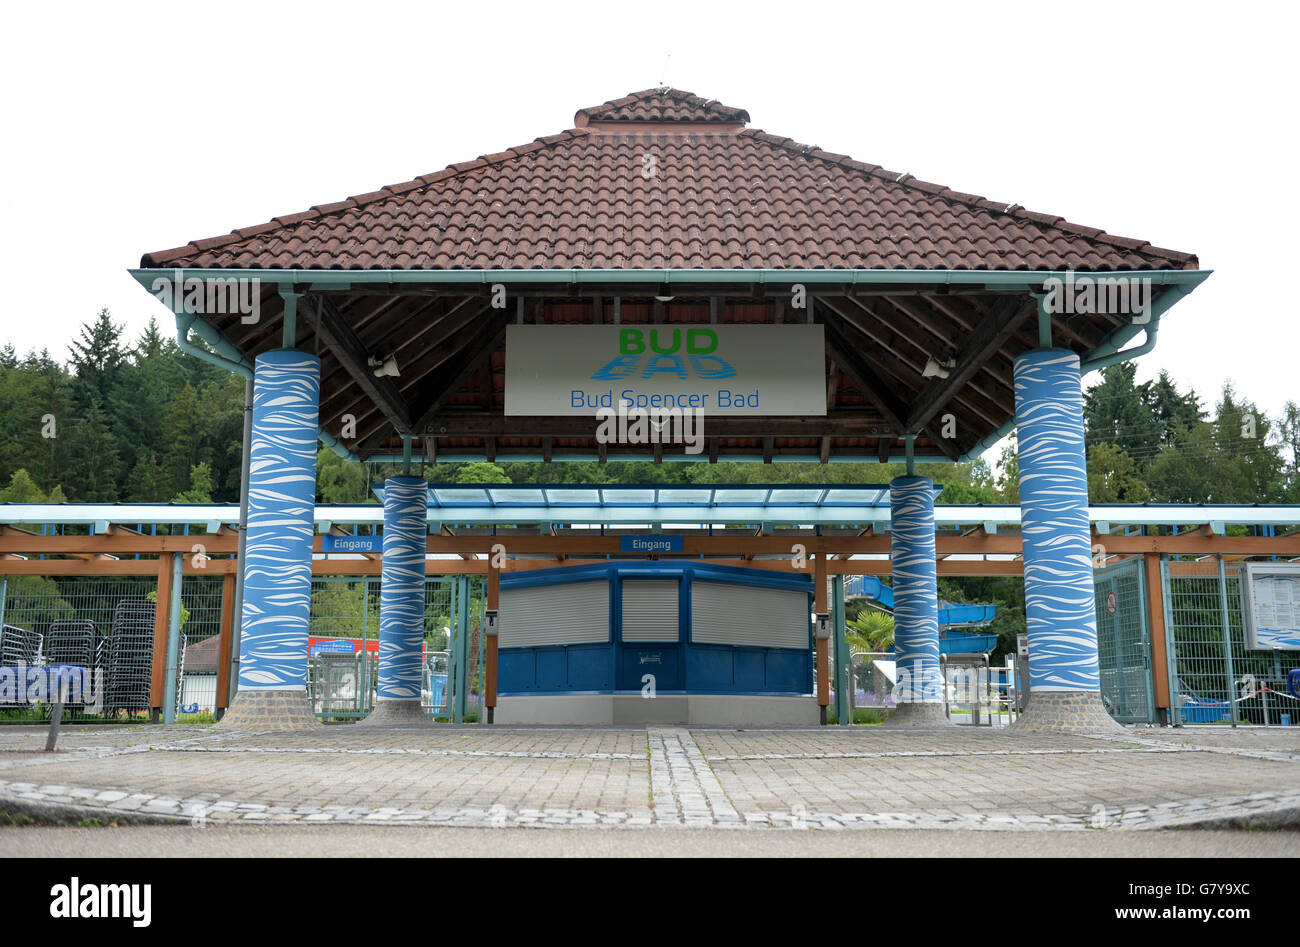 Schwaebisch Gmuend, Germany. 28th June, 2016. The entrance of the Bud Spencer public pool in Schwaebisch Gmuend, Germany, 28 June 2016. The visitors of the public pool named after Italian actor Carlo Pedersoli (also known as Bud Spencer) commemorate him after his death. PHOTO: JAN-PHILIPP STROBEL/dpa/Alamy Live News Stock Photo